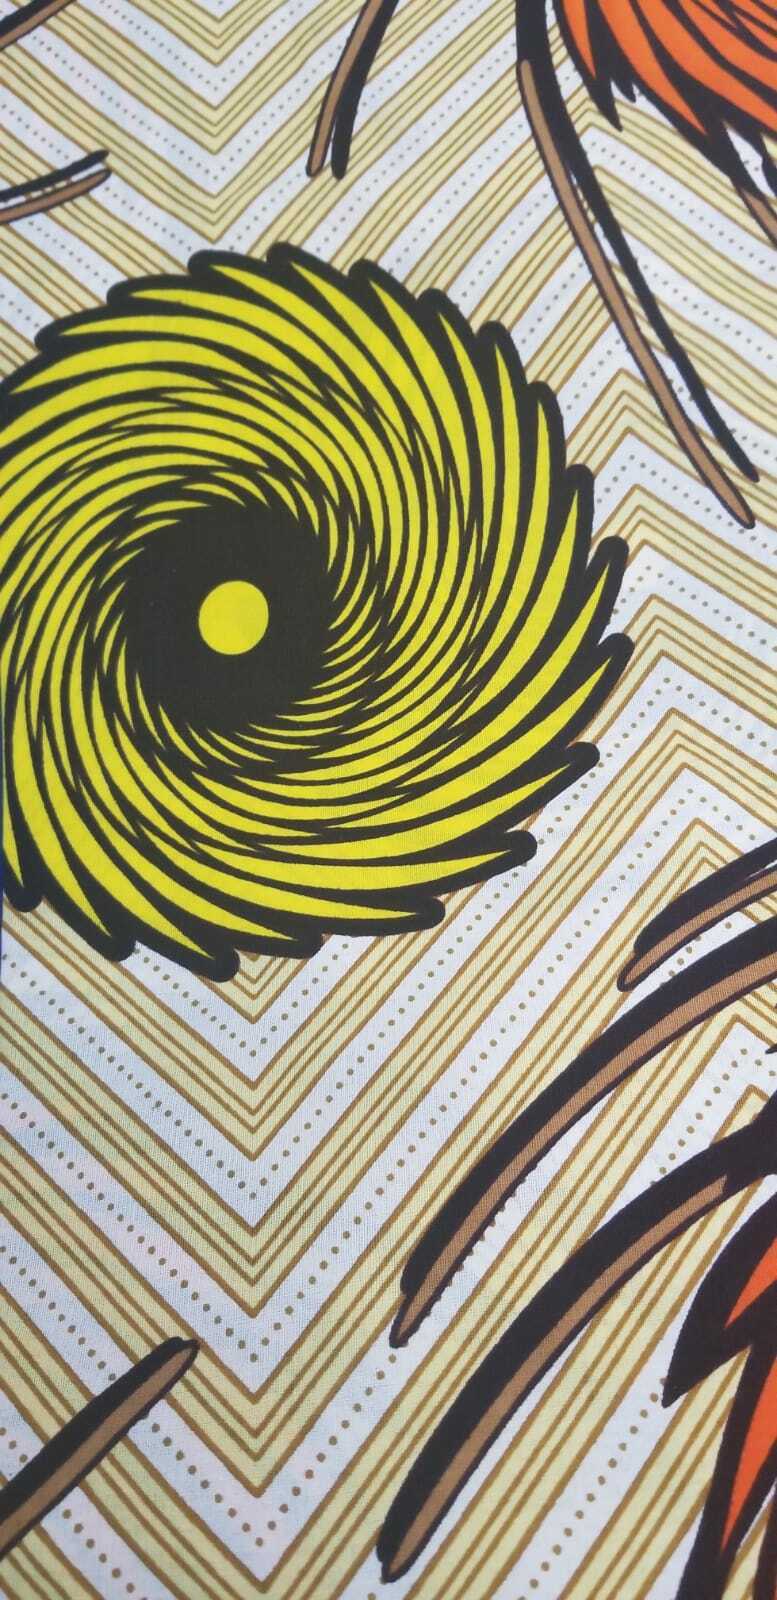 Eye of the Storm African Print 100% Cotton $7 per yard